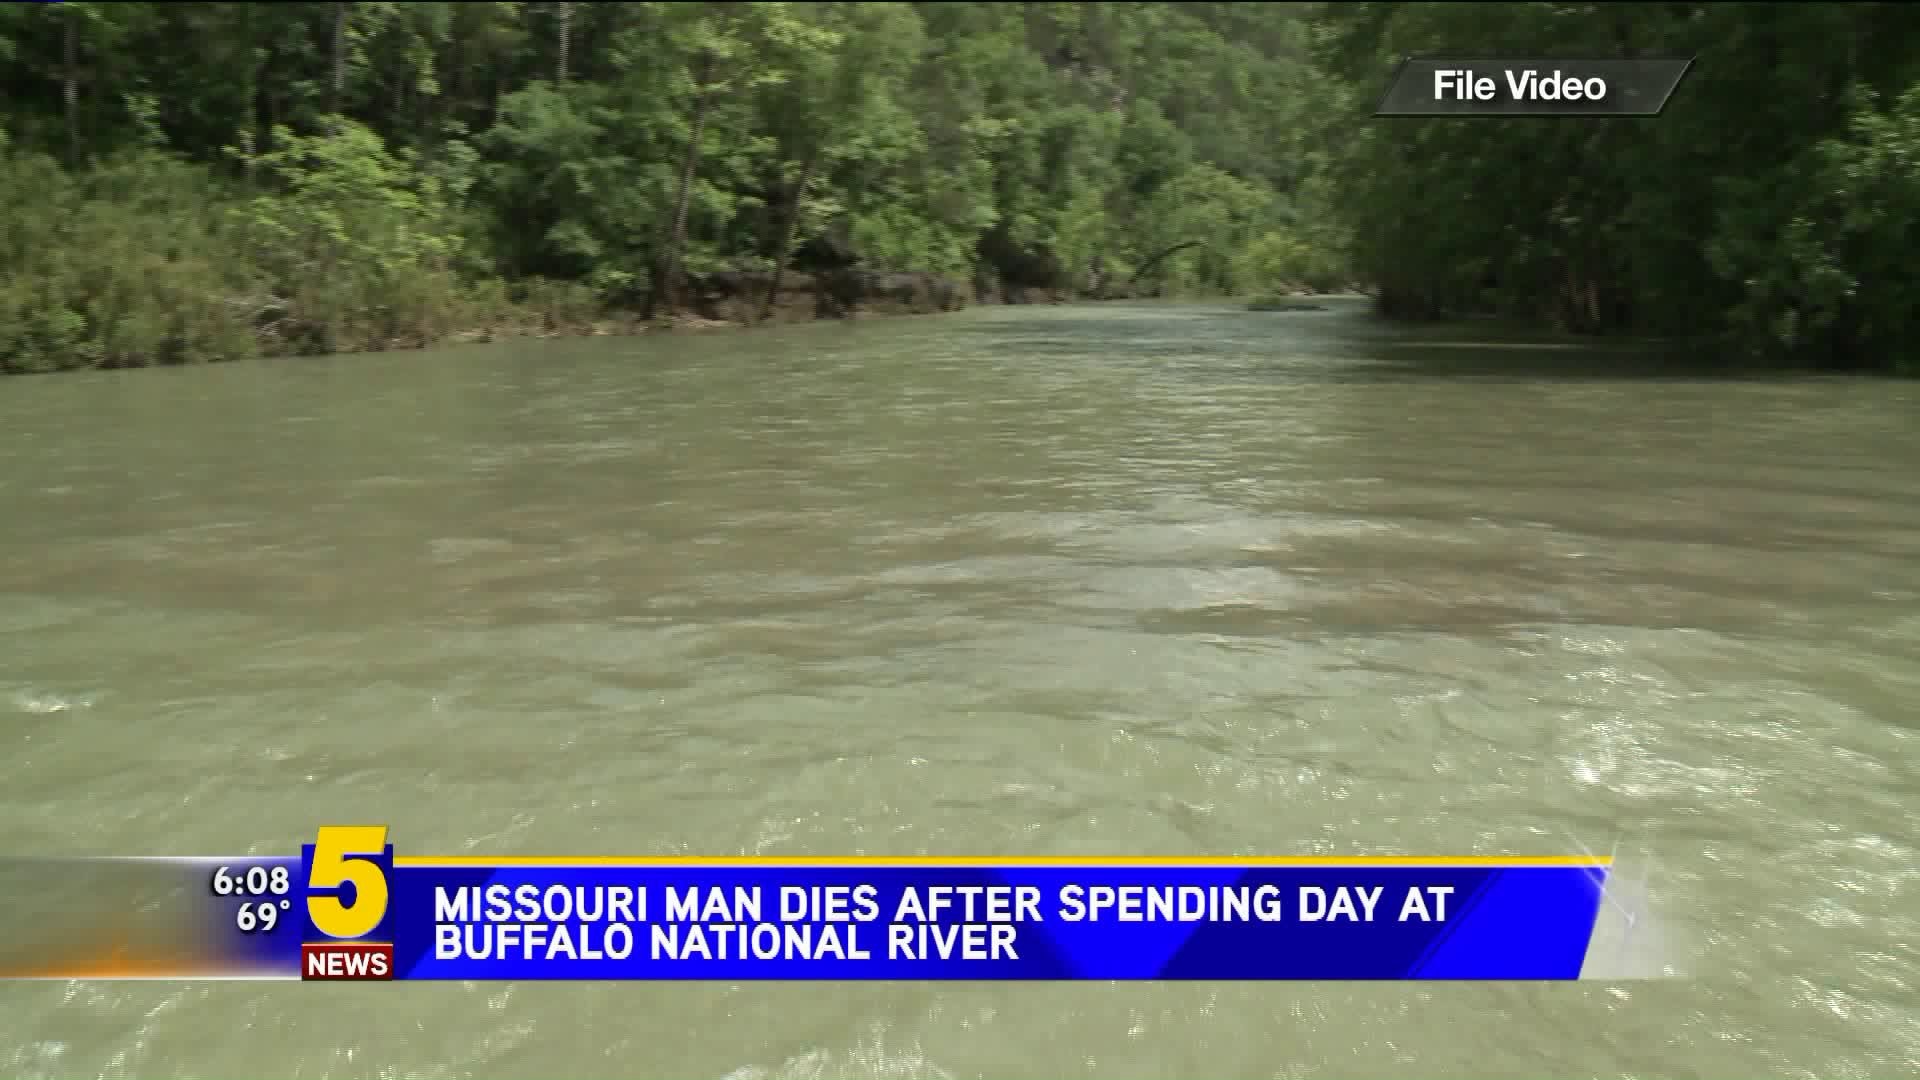 Missouri Man Dies After Spending Day At Buffalo National River